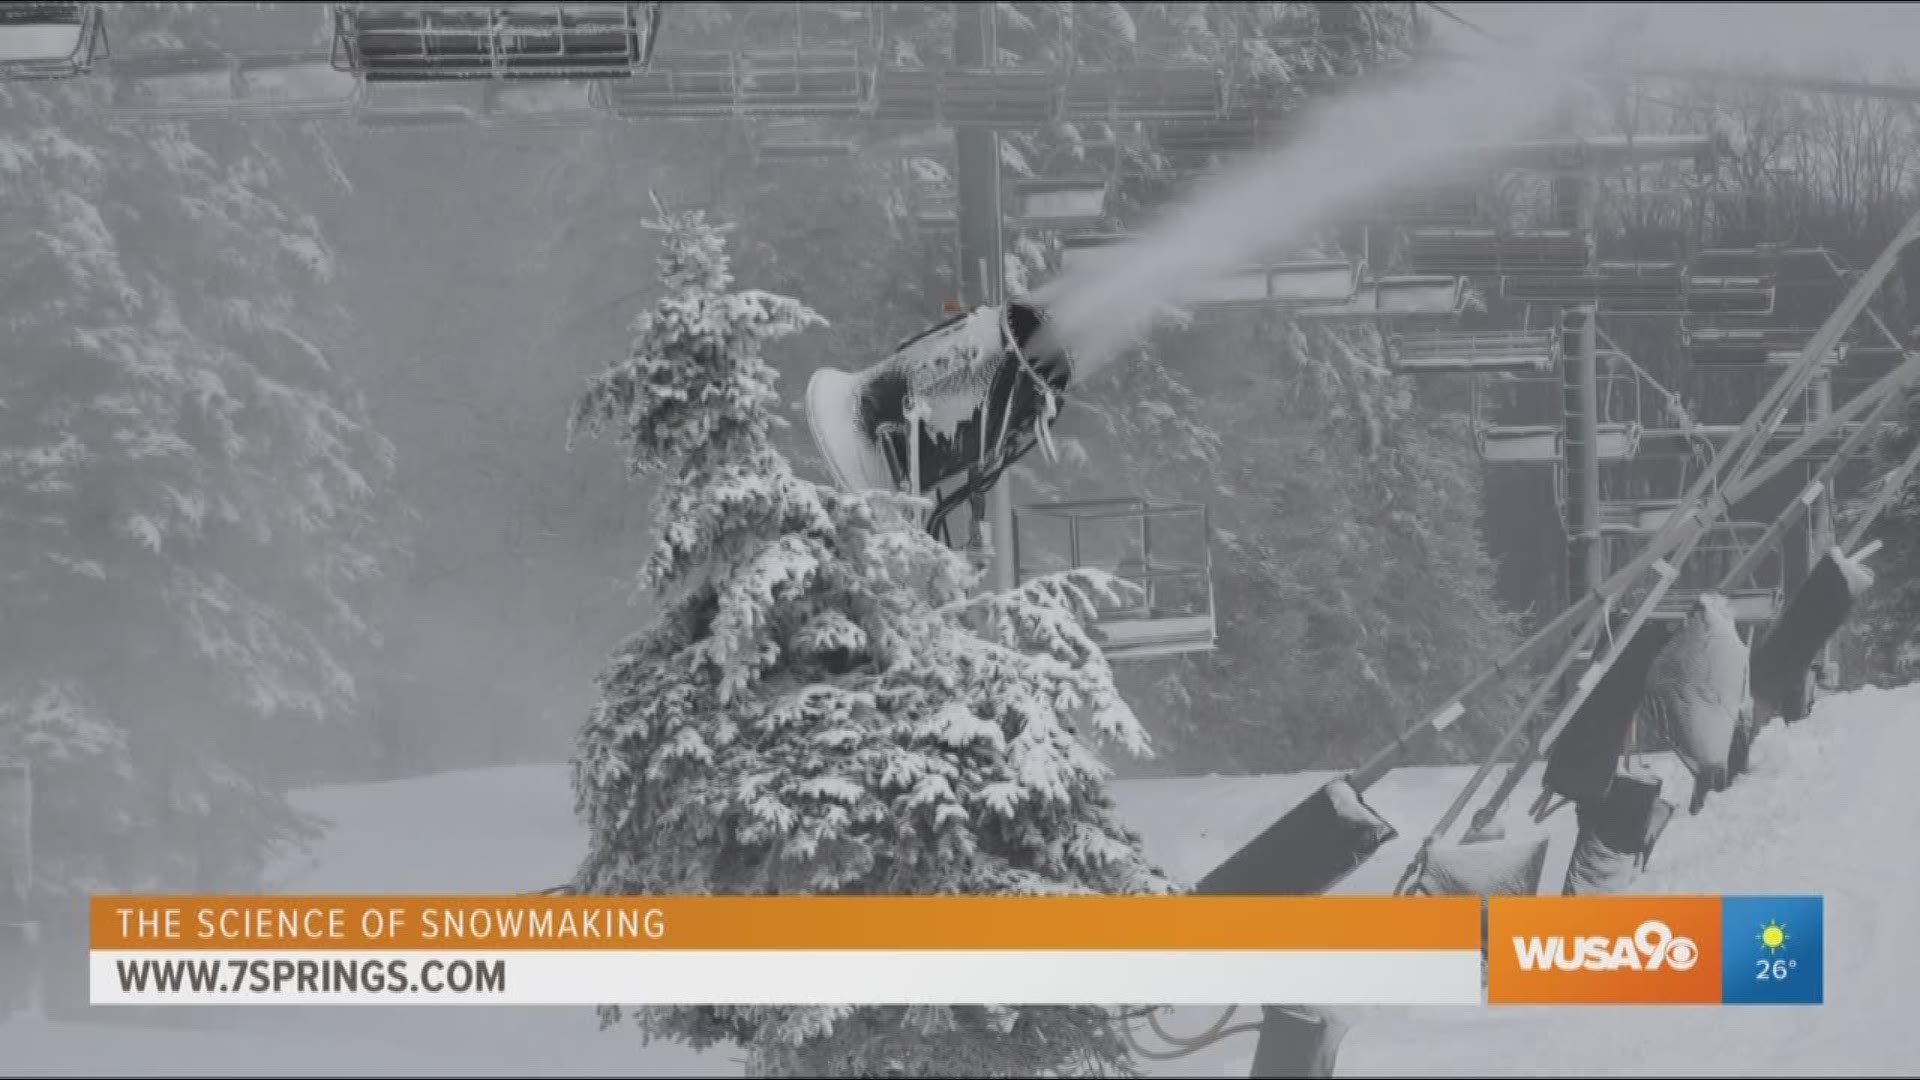 Learn exactly what it takes to make snow on the slopes at 7 Springs Mountain Resort. This segment is sponsored by 7 Springs Mountain Resort.